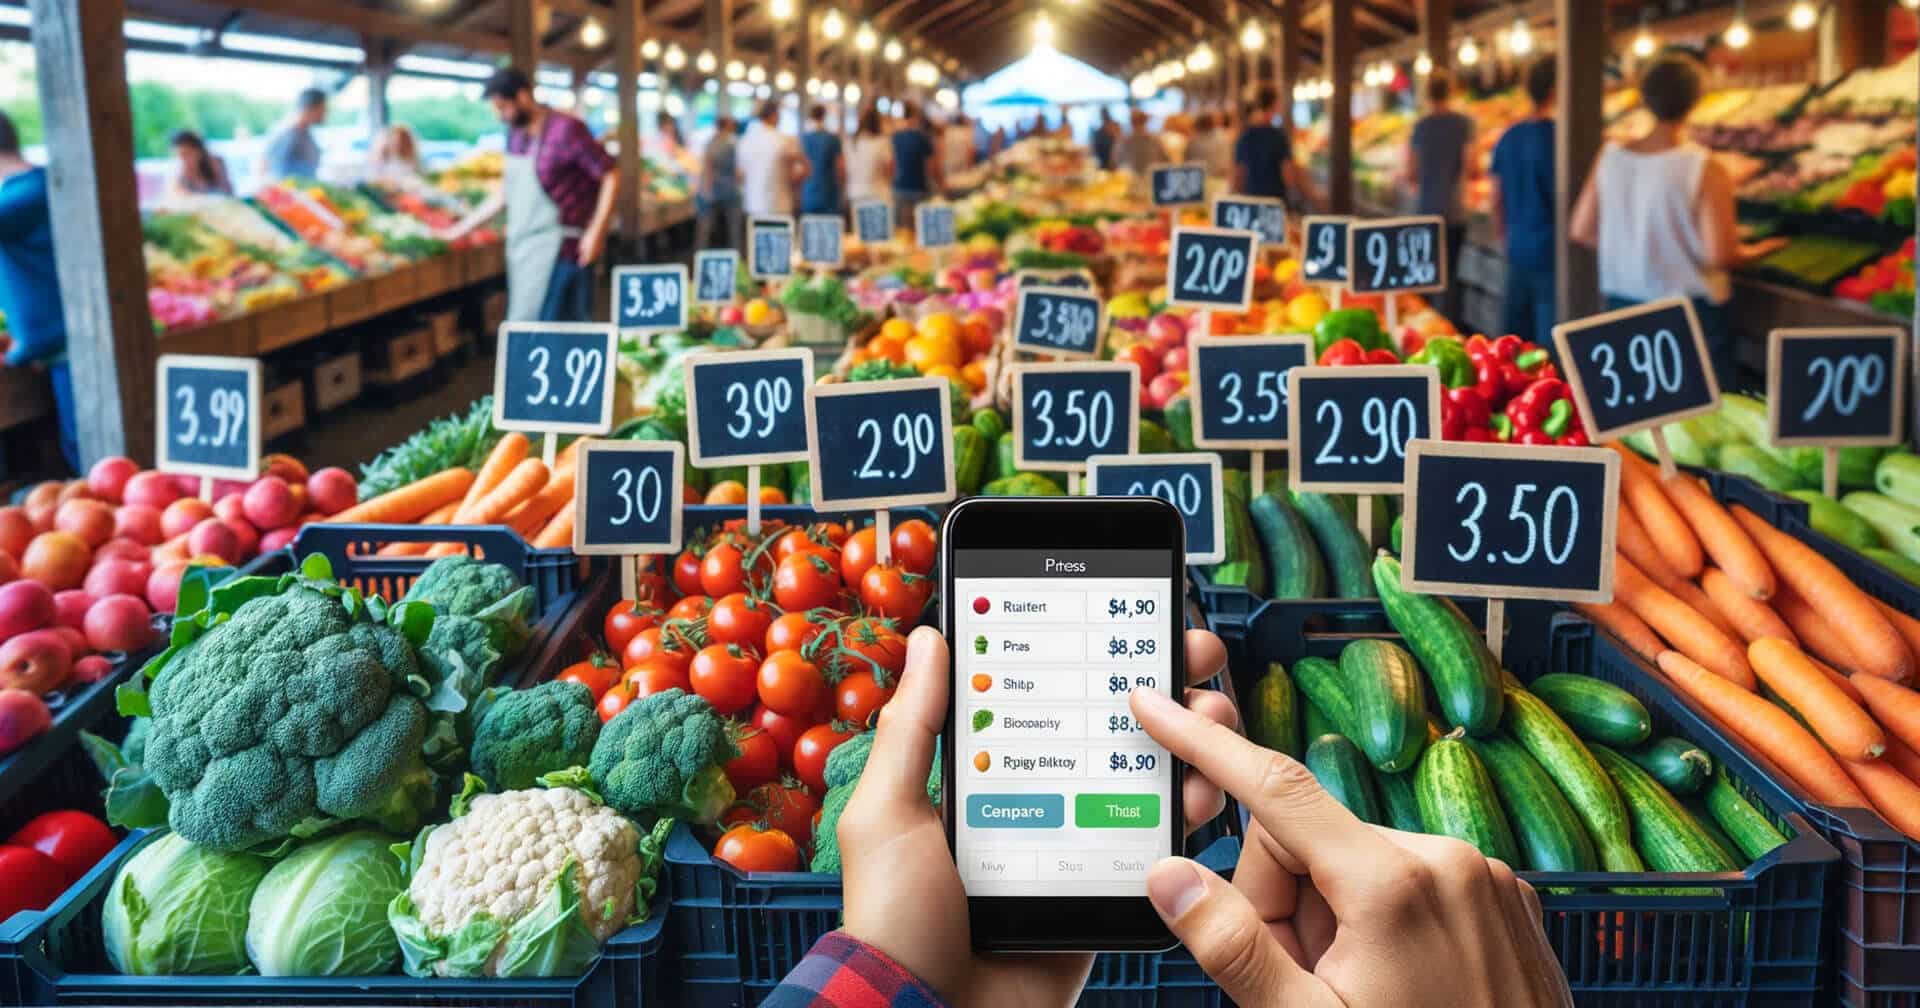 A person holding a smartphone in front of a vibrant market filled with fresh vegetables.